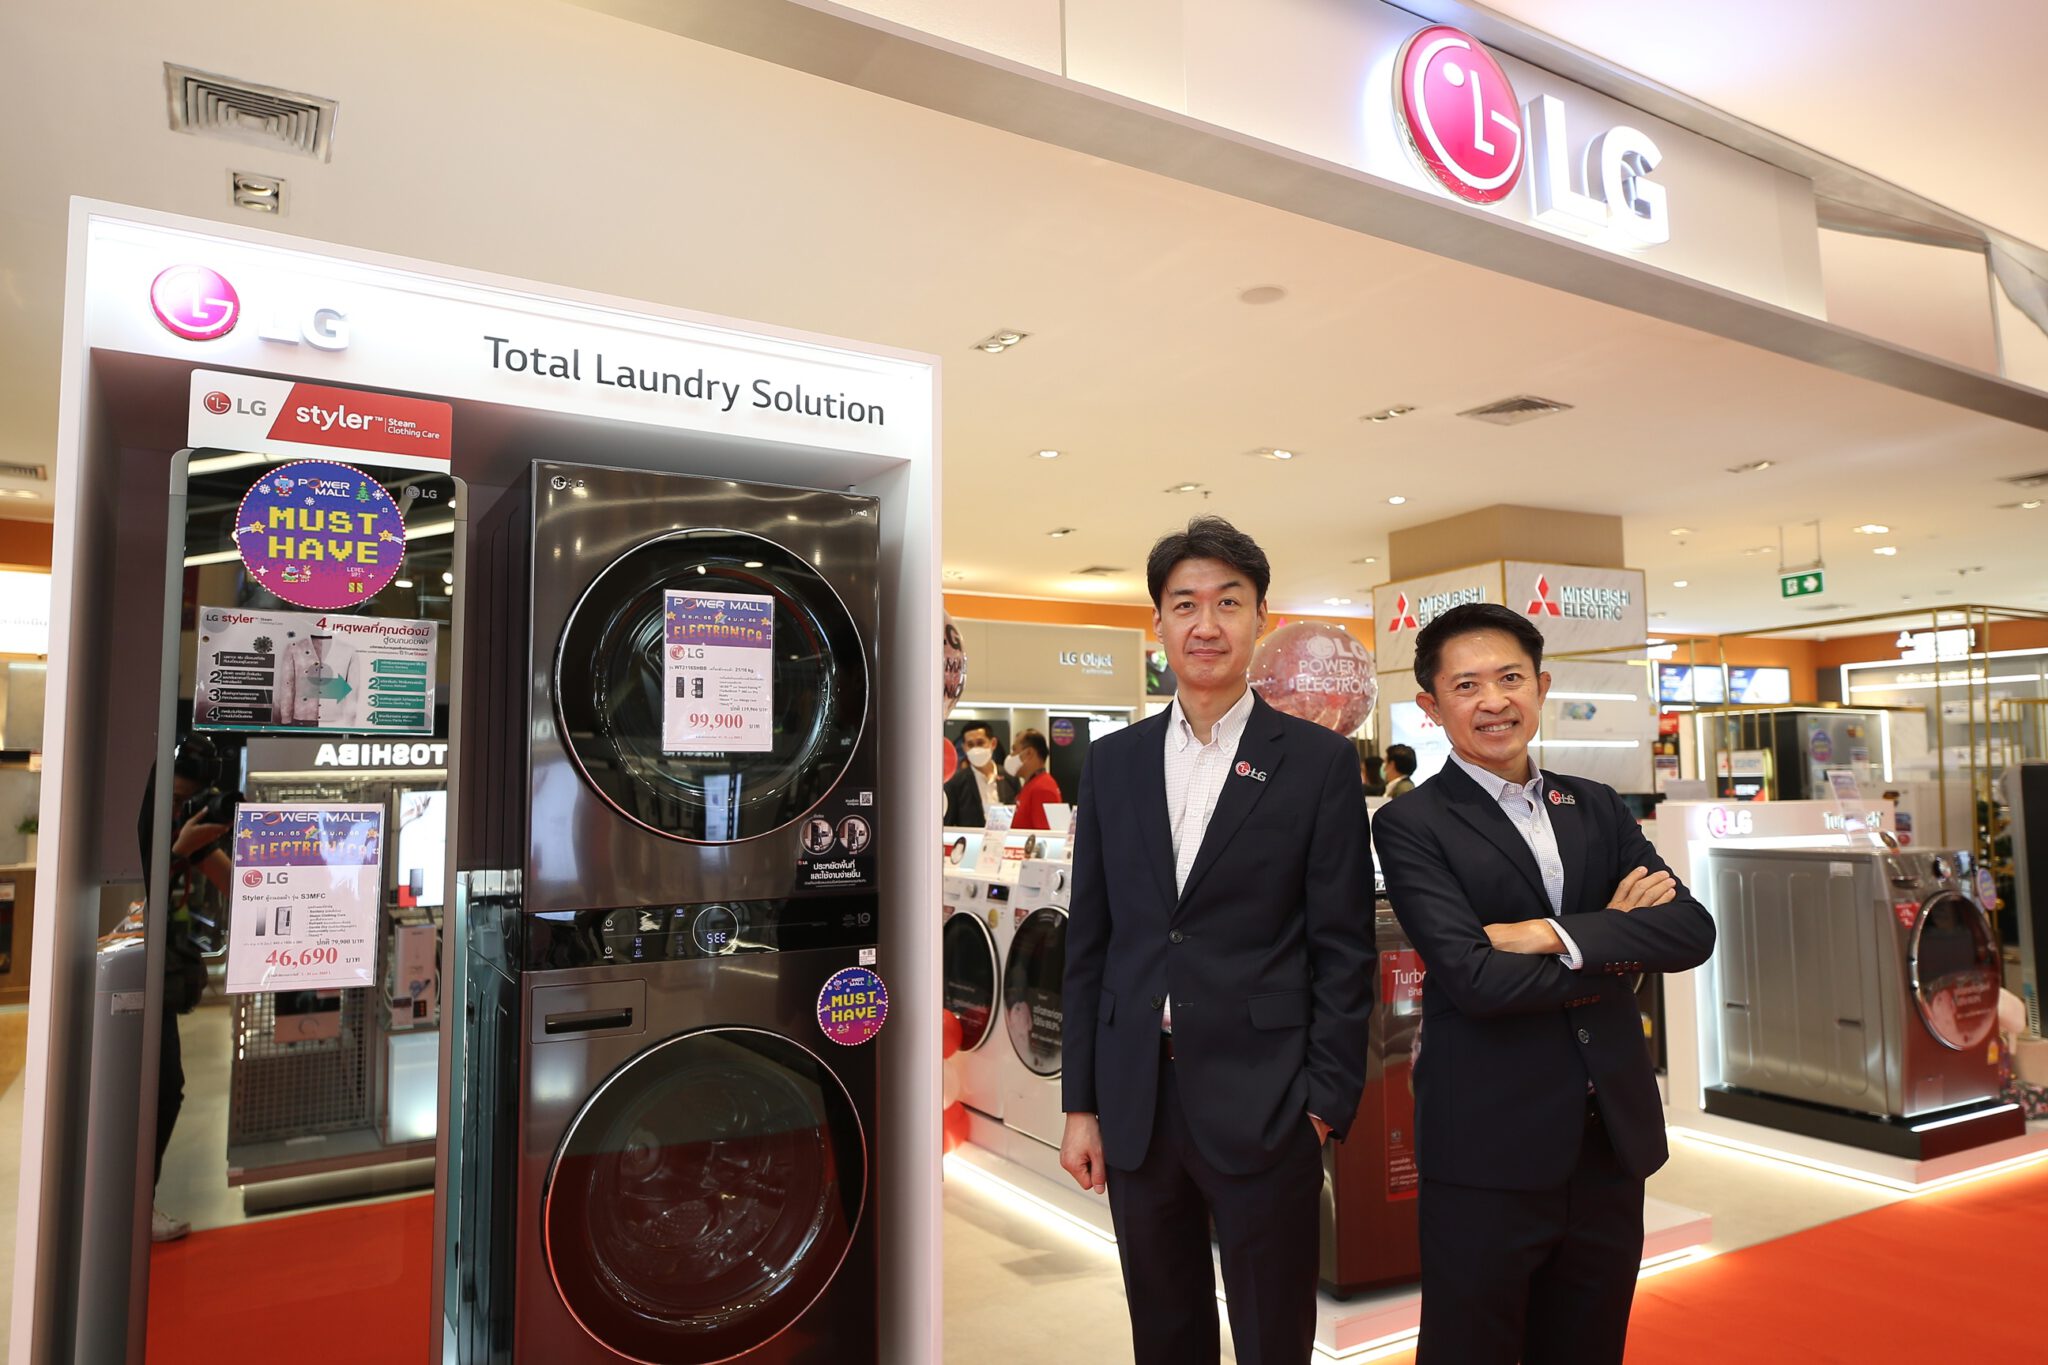 - 2. LG x Power Mall Electronica scaled - ภาพที่ 3